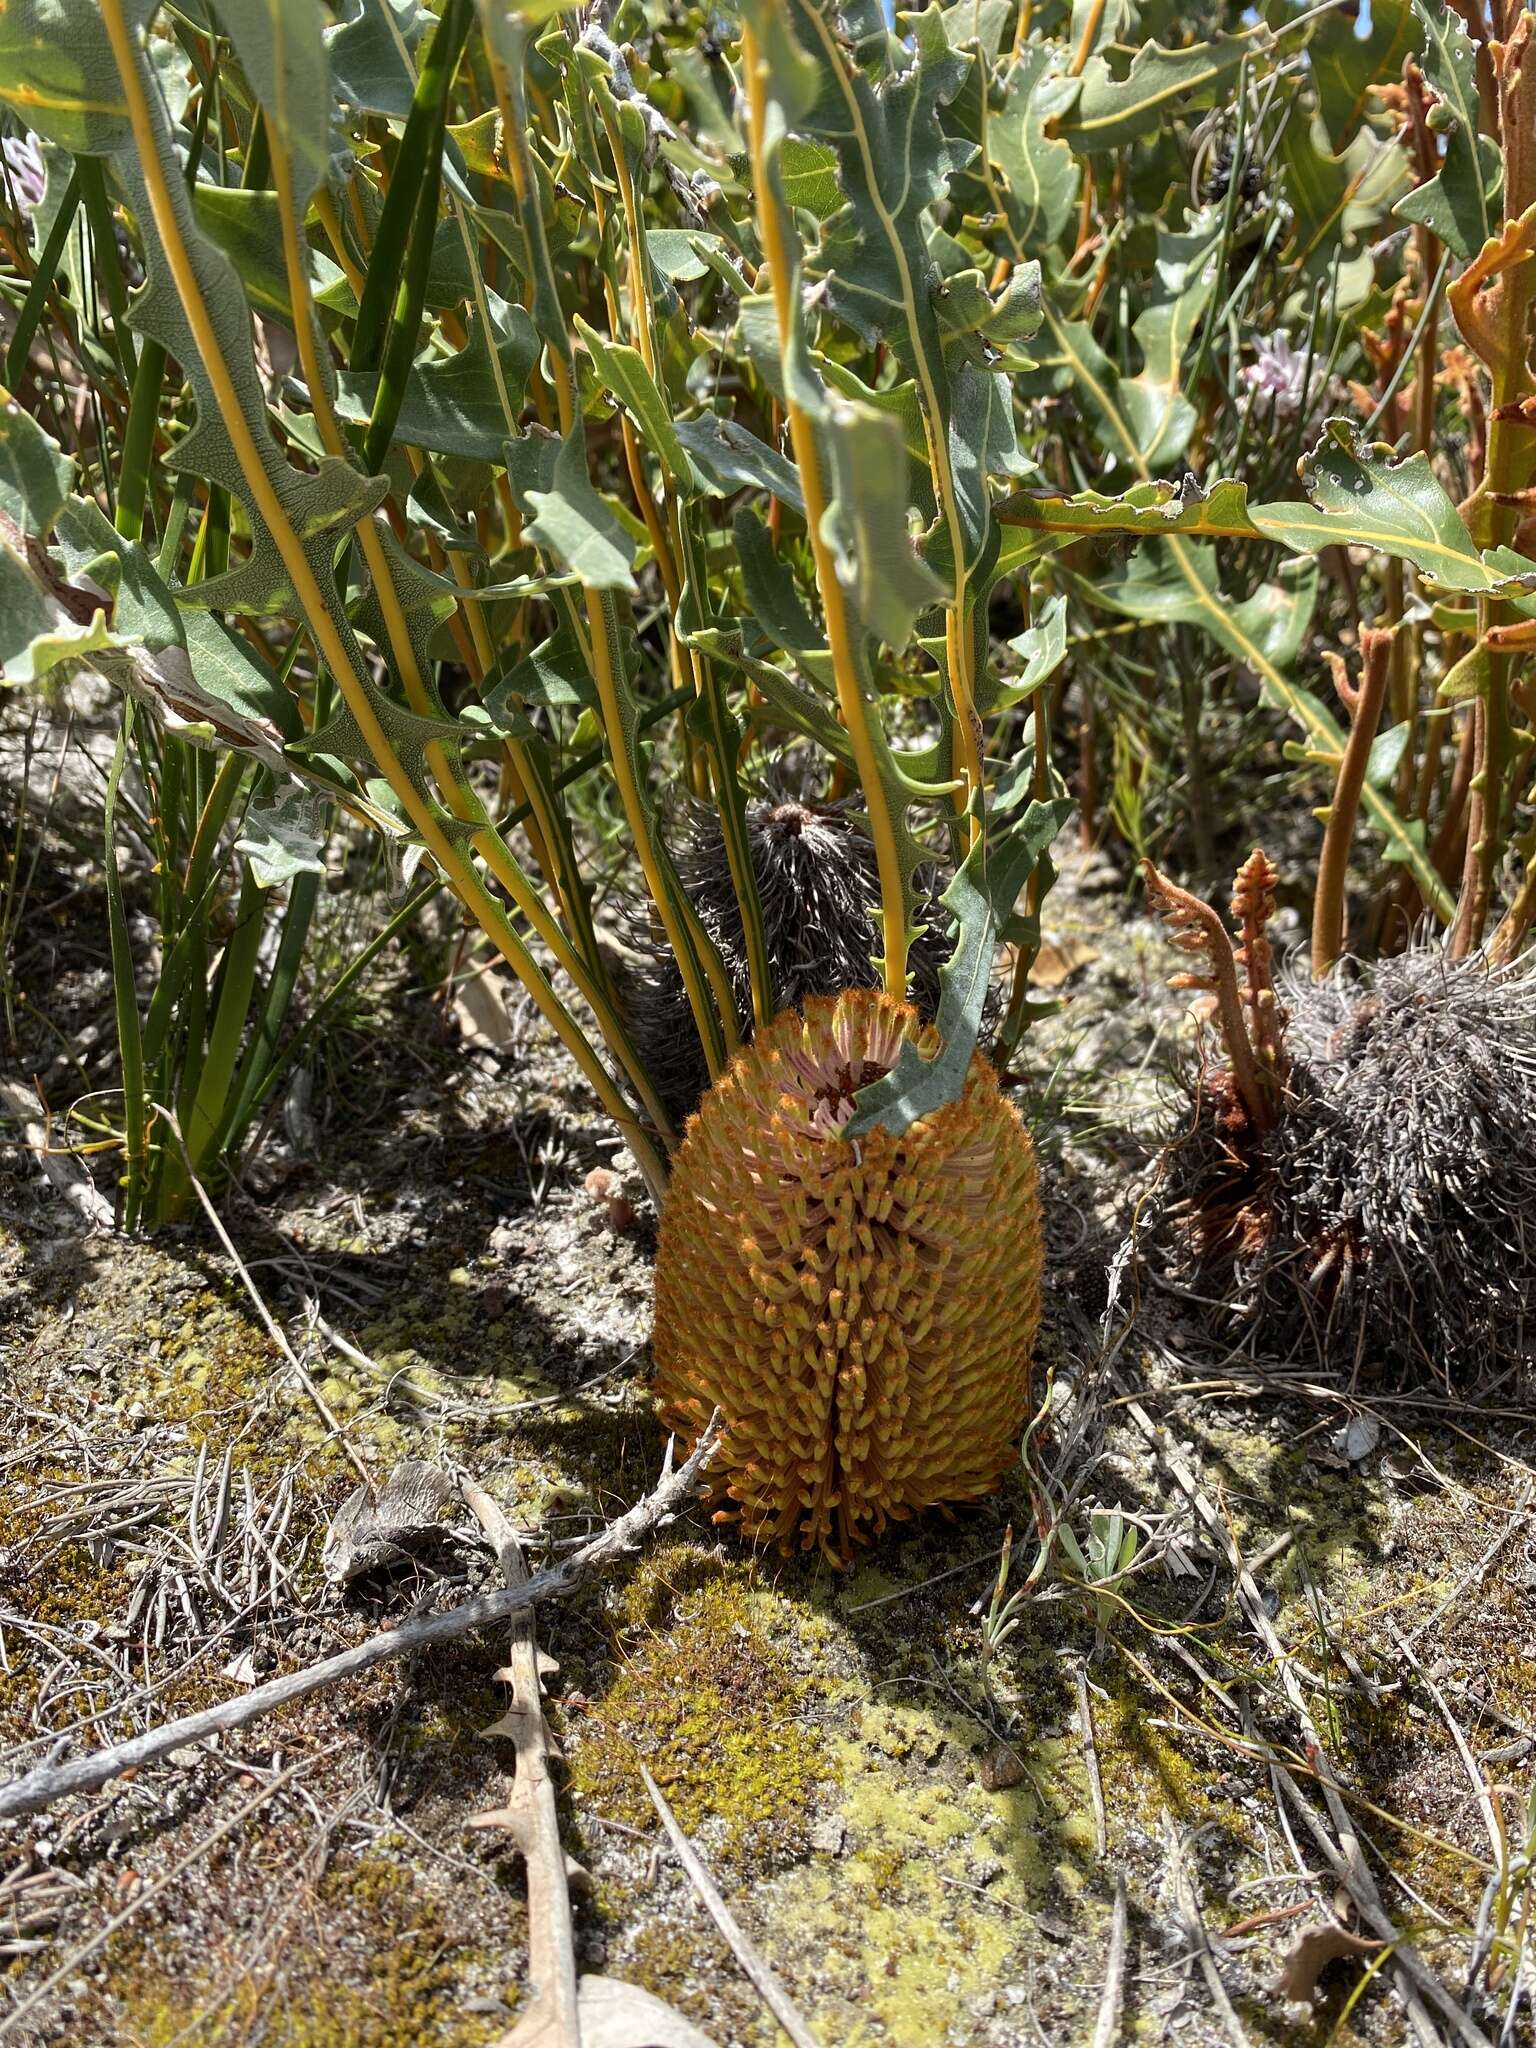 Image of Banksia repens Labill.